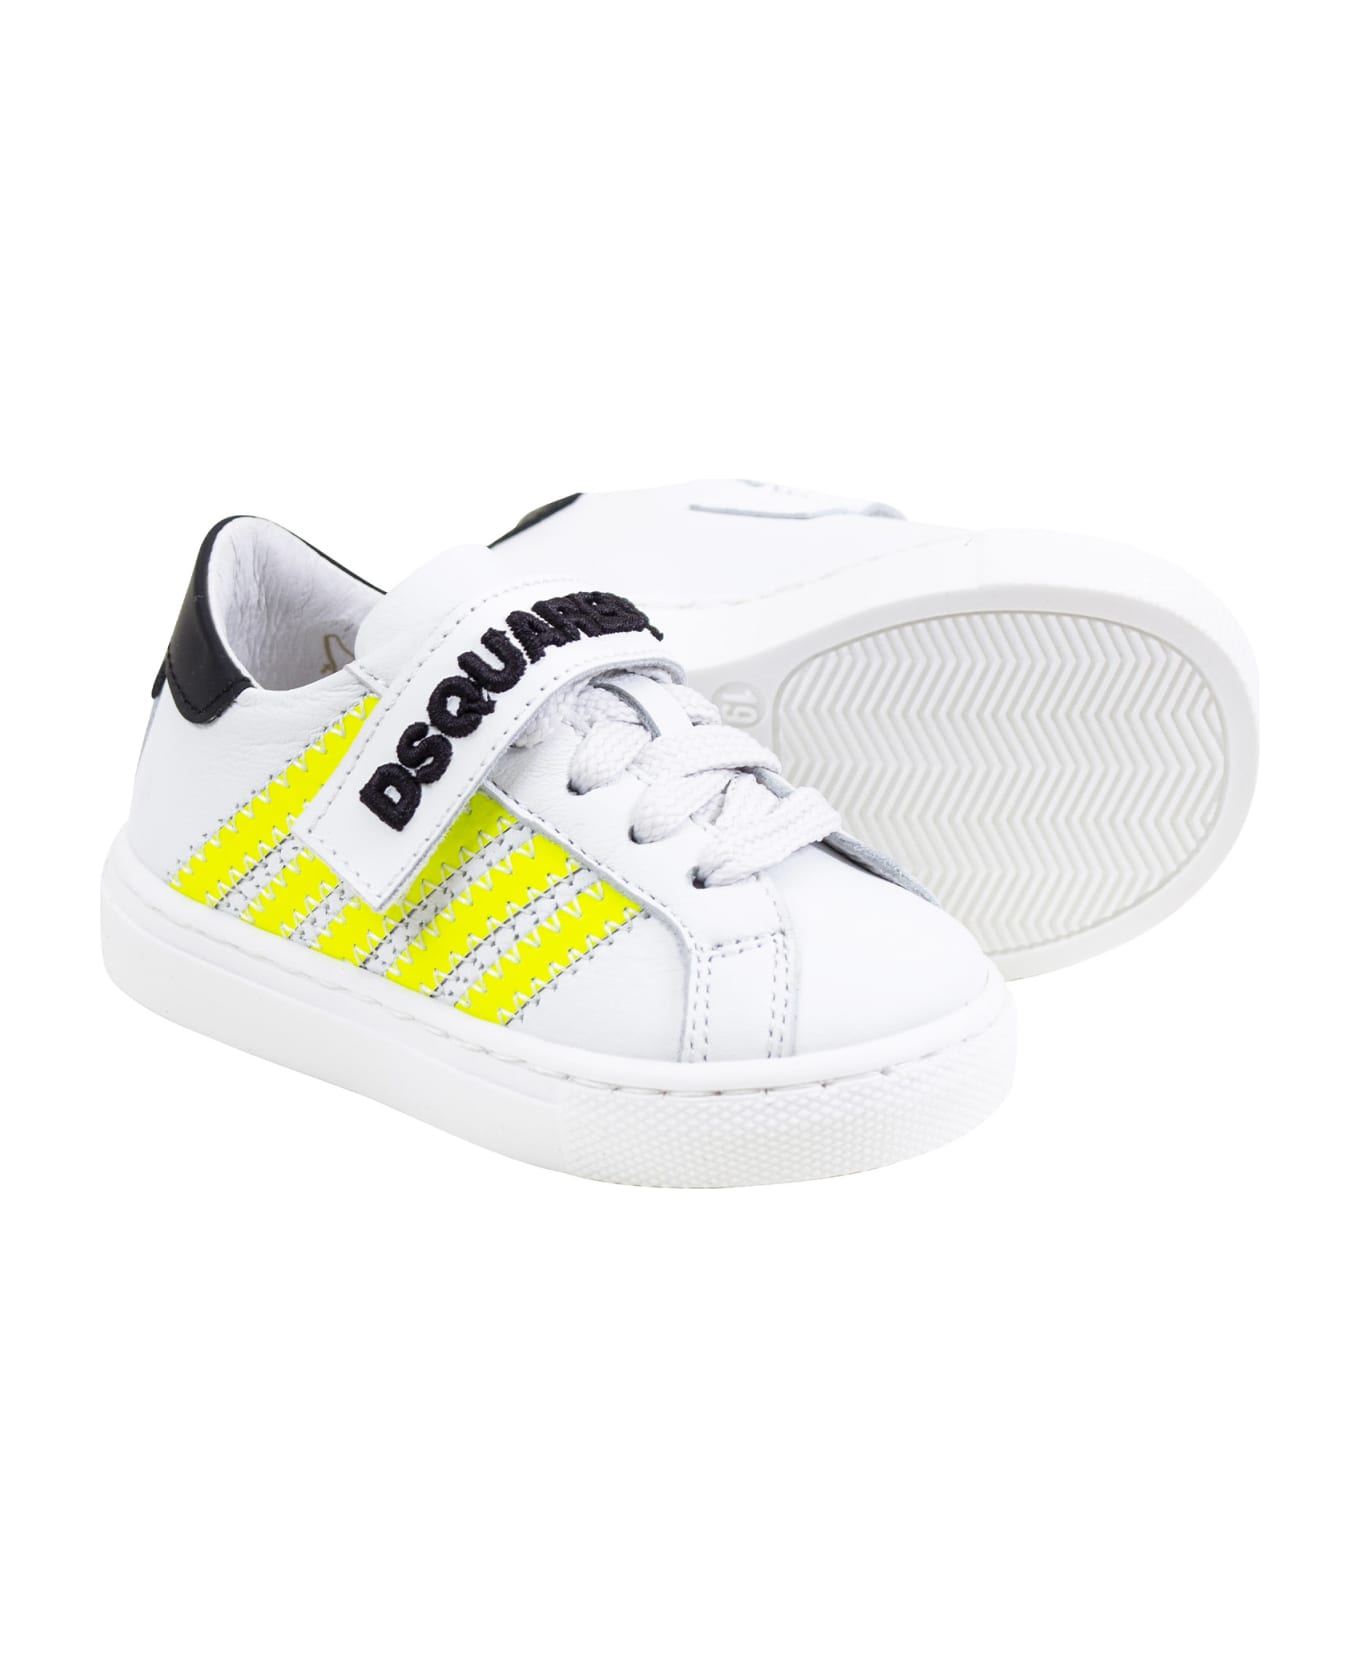 Dsquared2 Child Sneakers - Variante unica シューズ